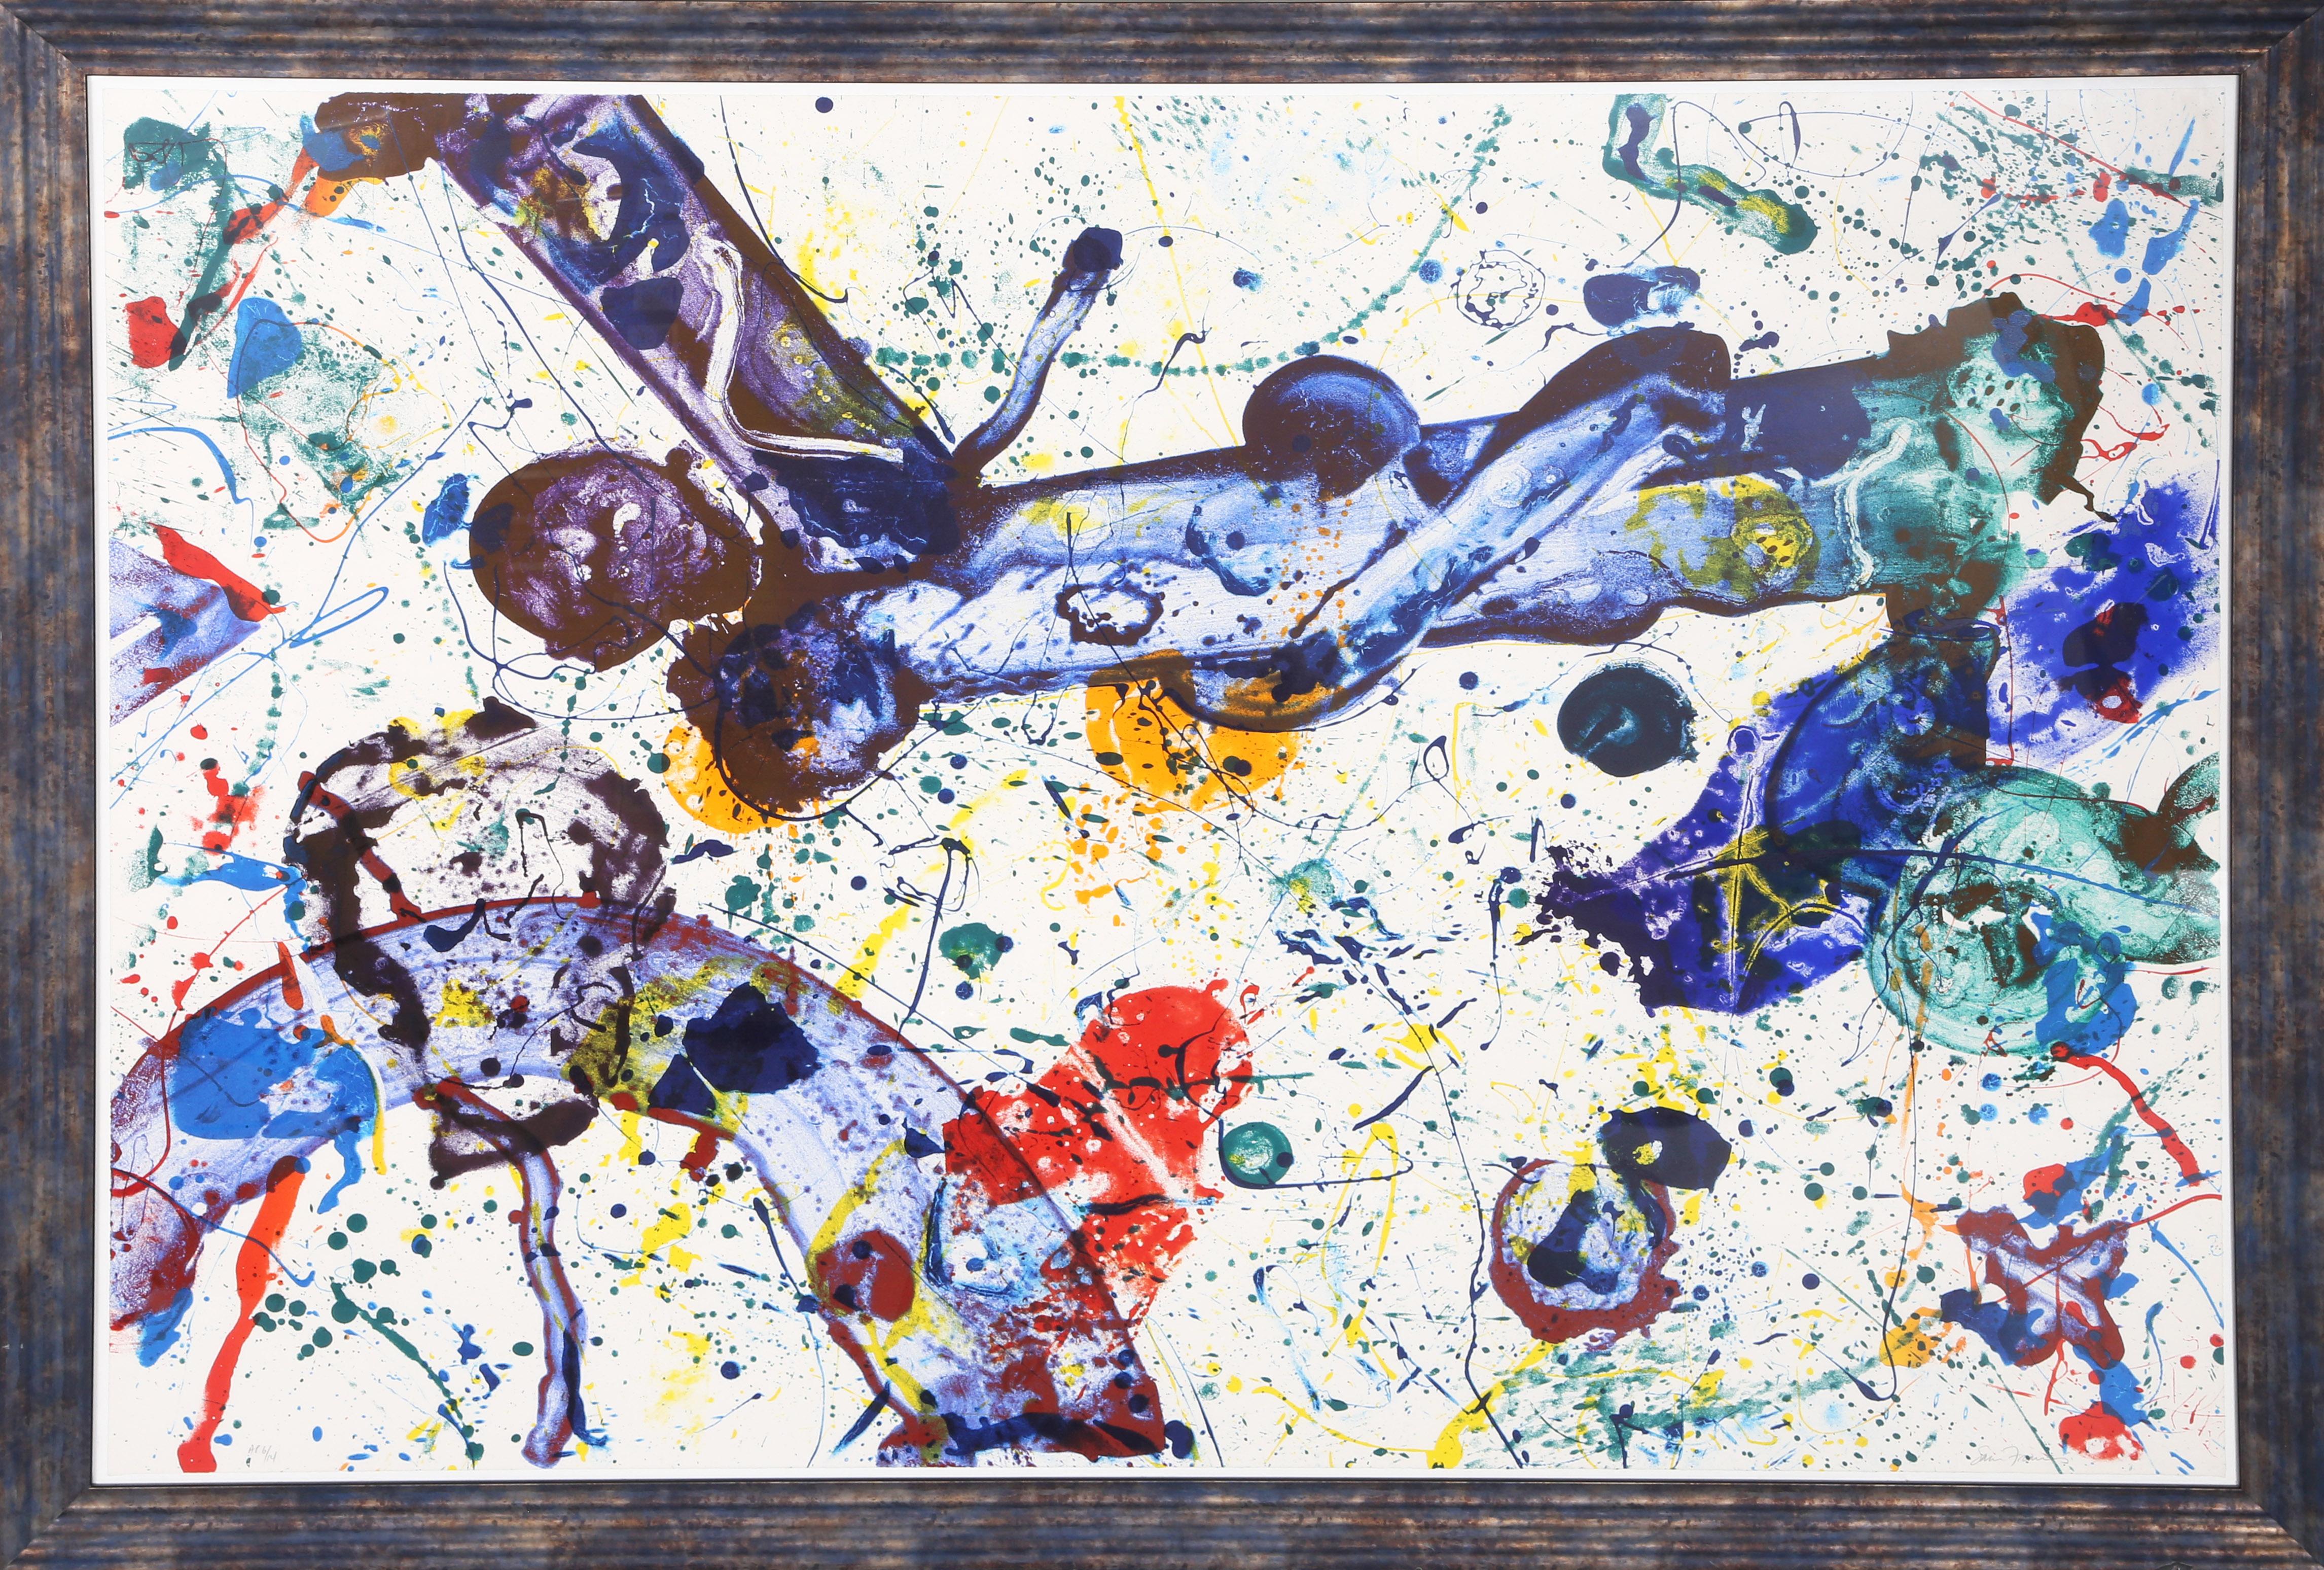 Original hand-signed and numbered silkscreen on Arches paper by American Abstract Expressionist Sam Francis. 

King Corpse
Sam Francis, American (1923–1994)
Date: 1986
Screenprint on Arches, signed and numbered in pencil
Edition of 65, AP 14
Size: